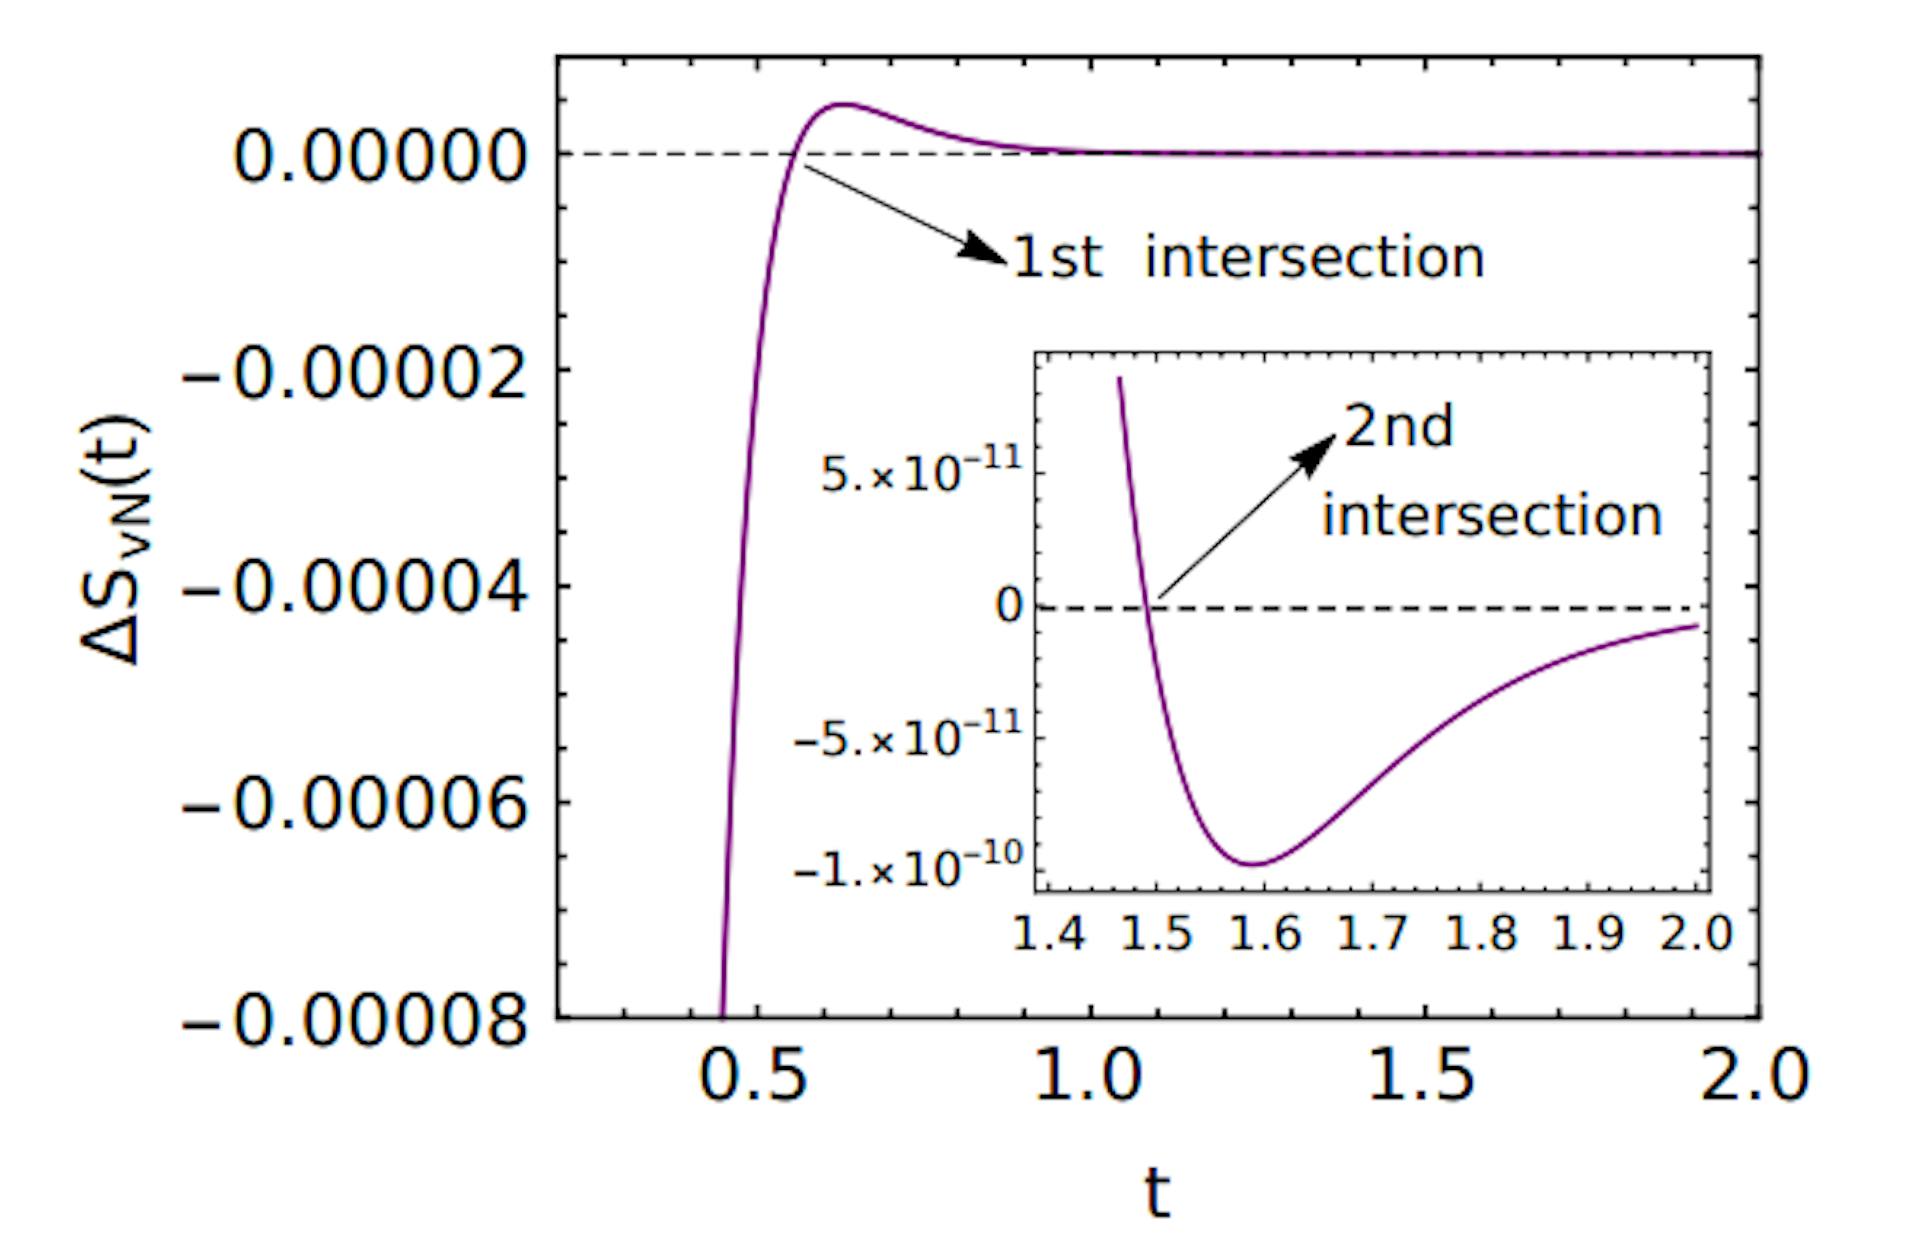 FIG. 4. The figure illustrates double QMPE in von Neumann entropy for the same set of parameters used in Fig. 3. The inset shows the second intersection where the magnitude of the second QMPE is much weaker than the first QMPE shown in the main figure.